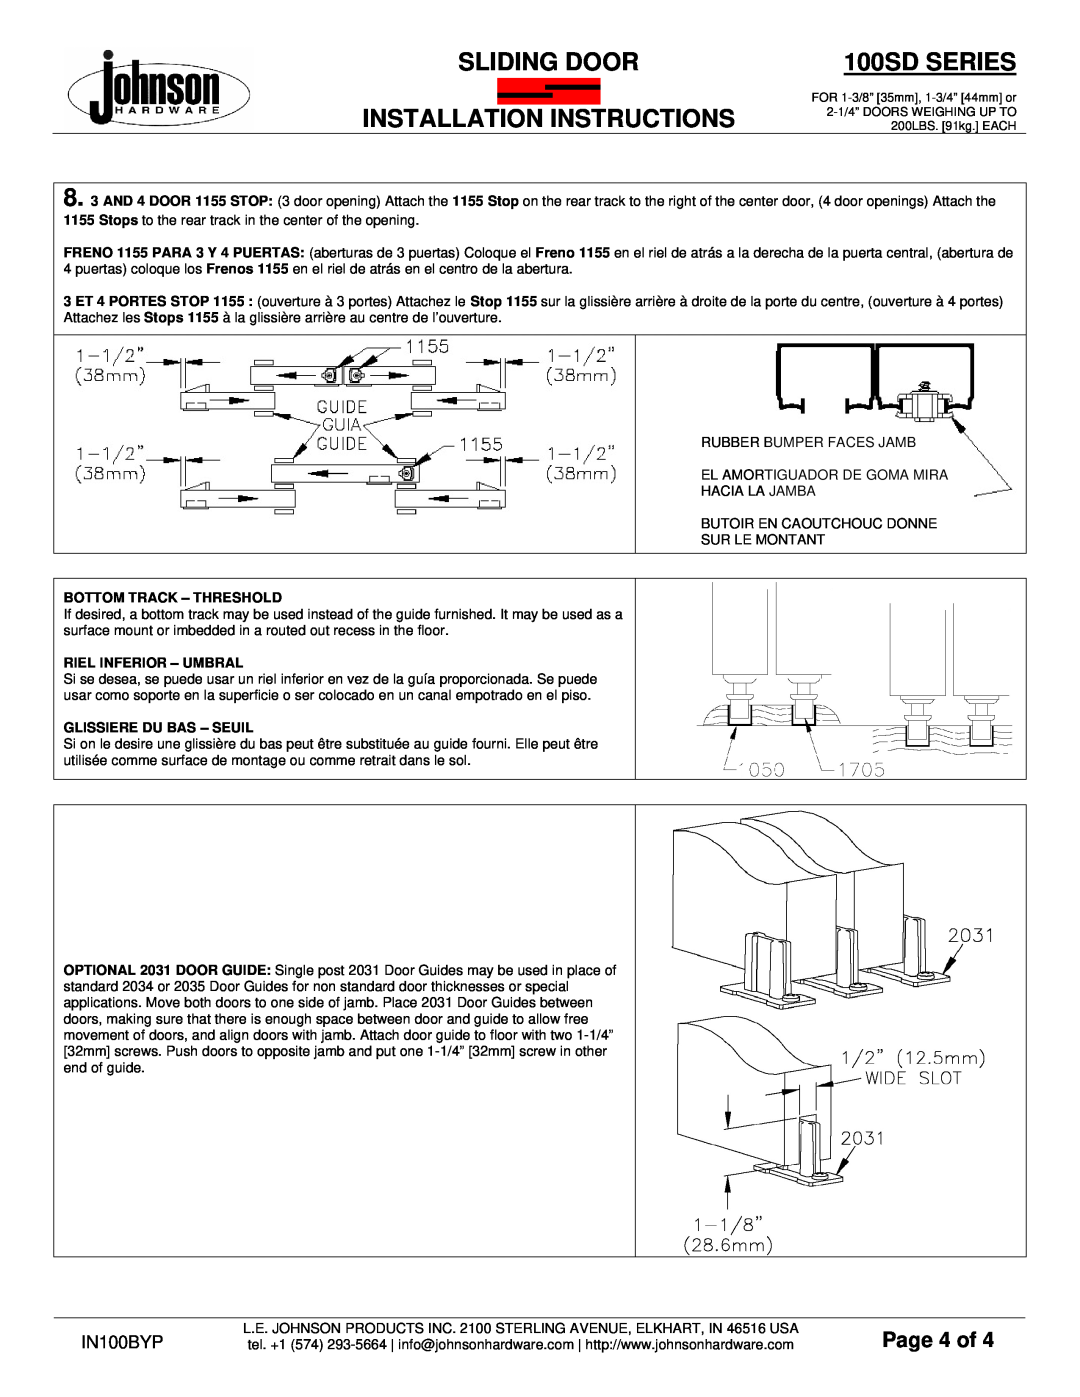 Johnson Hardware 100SD Series Page 4 of, Sliding Door, 100SD SERIES, IN100BYP, Bottom Track - Threshold 